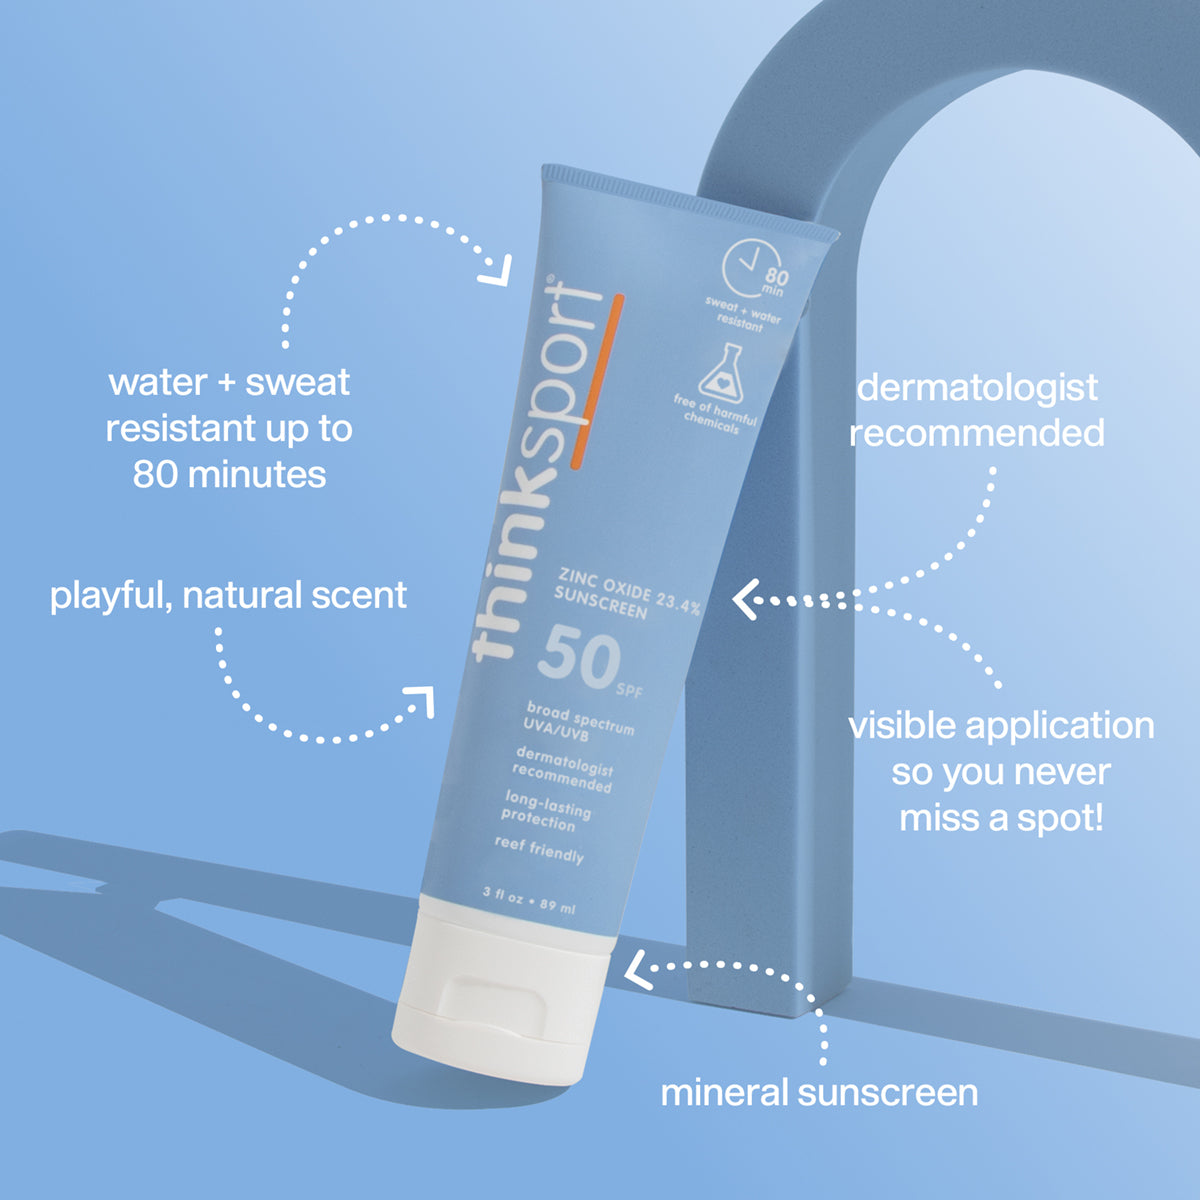 Image of ThinkSport sunscreen highlighting key features like water and sweat resistance for 80 minutes, a playful natural scent, and dermatologist recommendation.